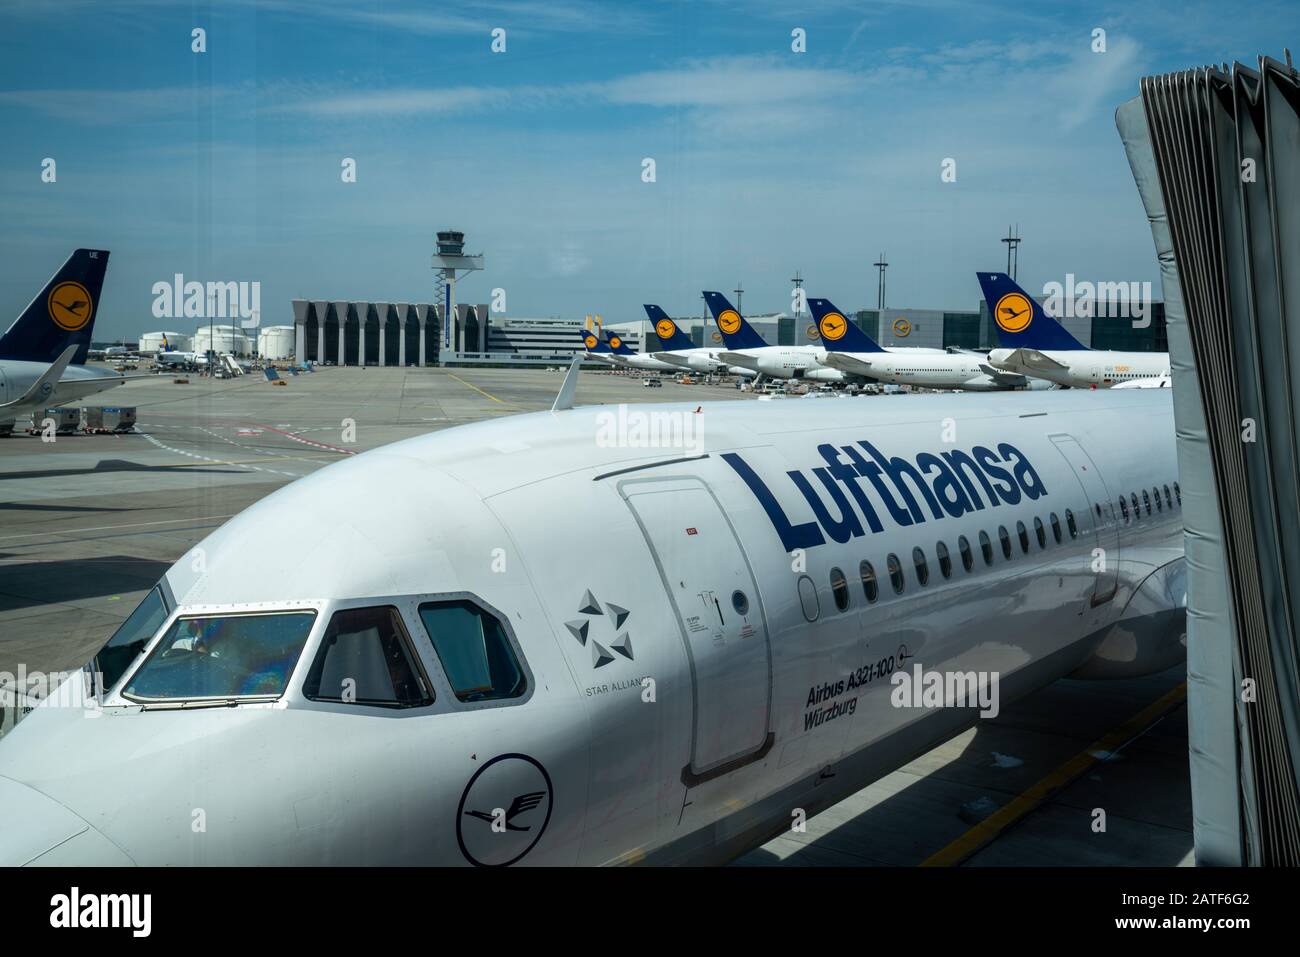 Deutsche Lufthansa AG logos Airbus aircraft at passenger boarding area with fleet in view Stock Photo